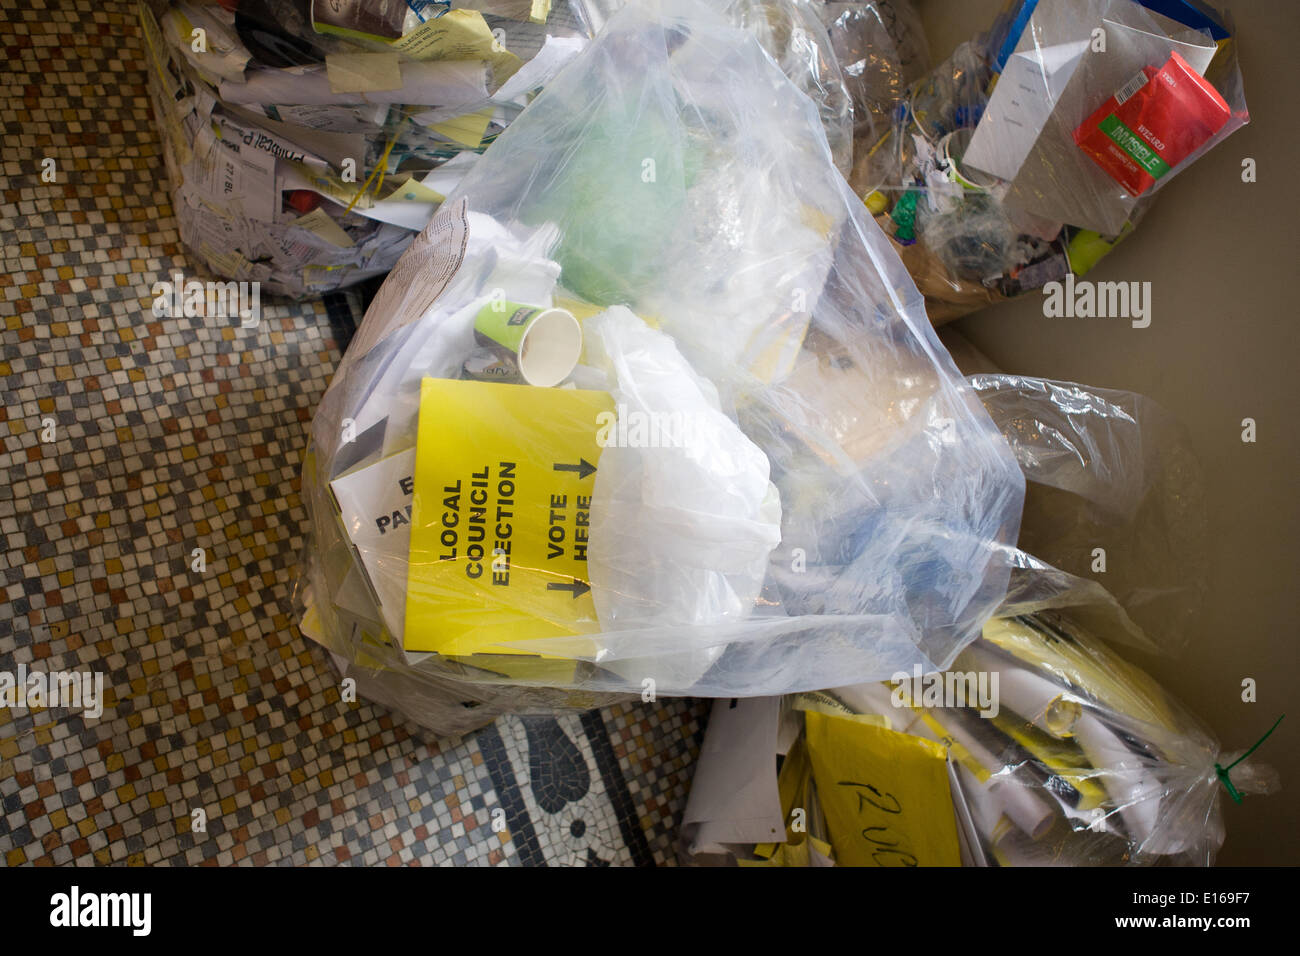 Belfast,UK 23rd May 2014. Election sign in Clear plastic rubbish bag Credit:  Bonzo/Alamy Live News Stock Photo